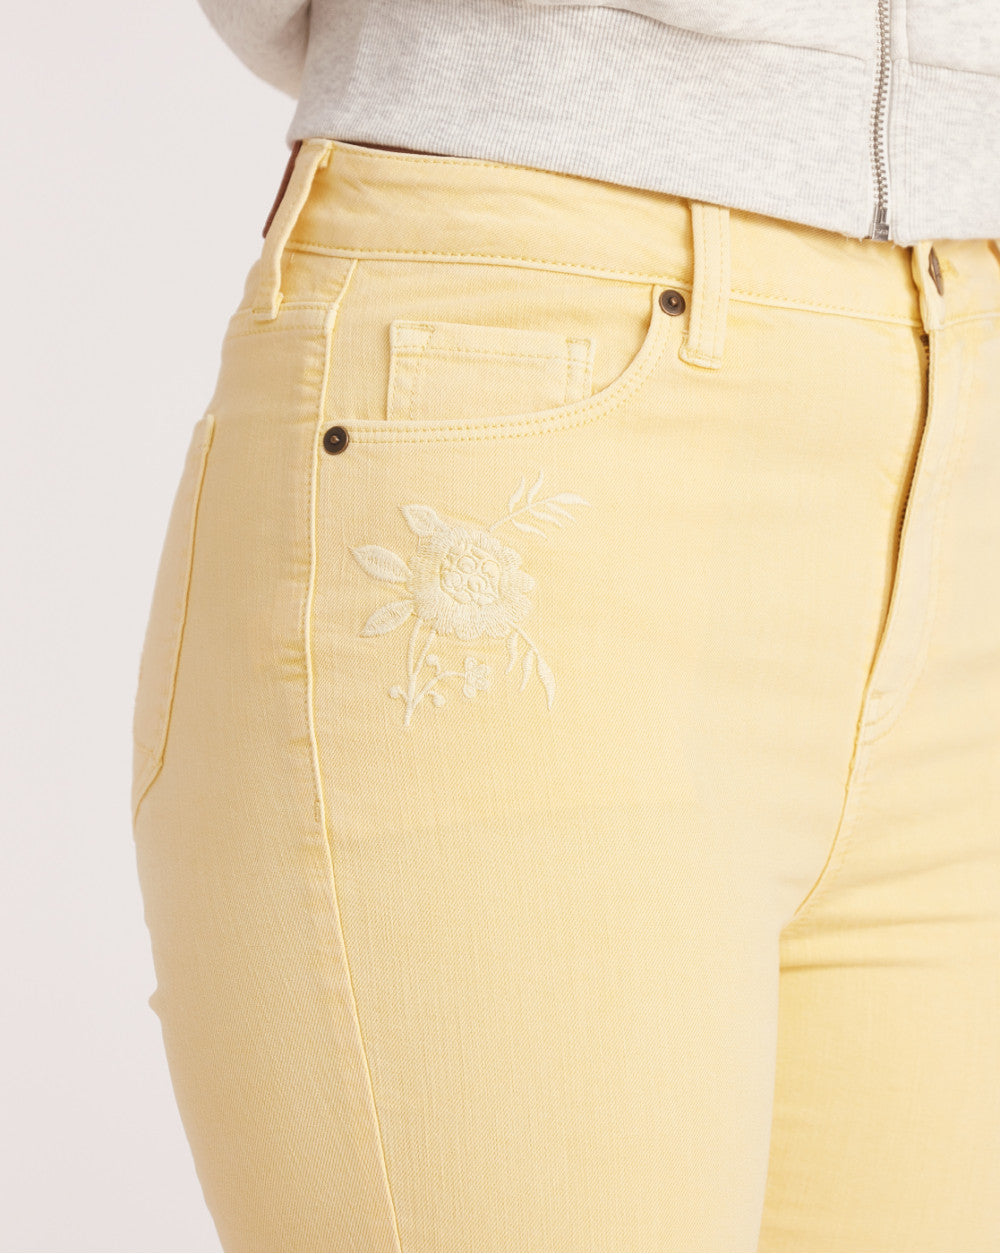 Skinny Fit High Waist Floral Embroidered Colored Jeans - Daffodil Yellow